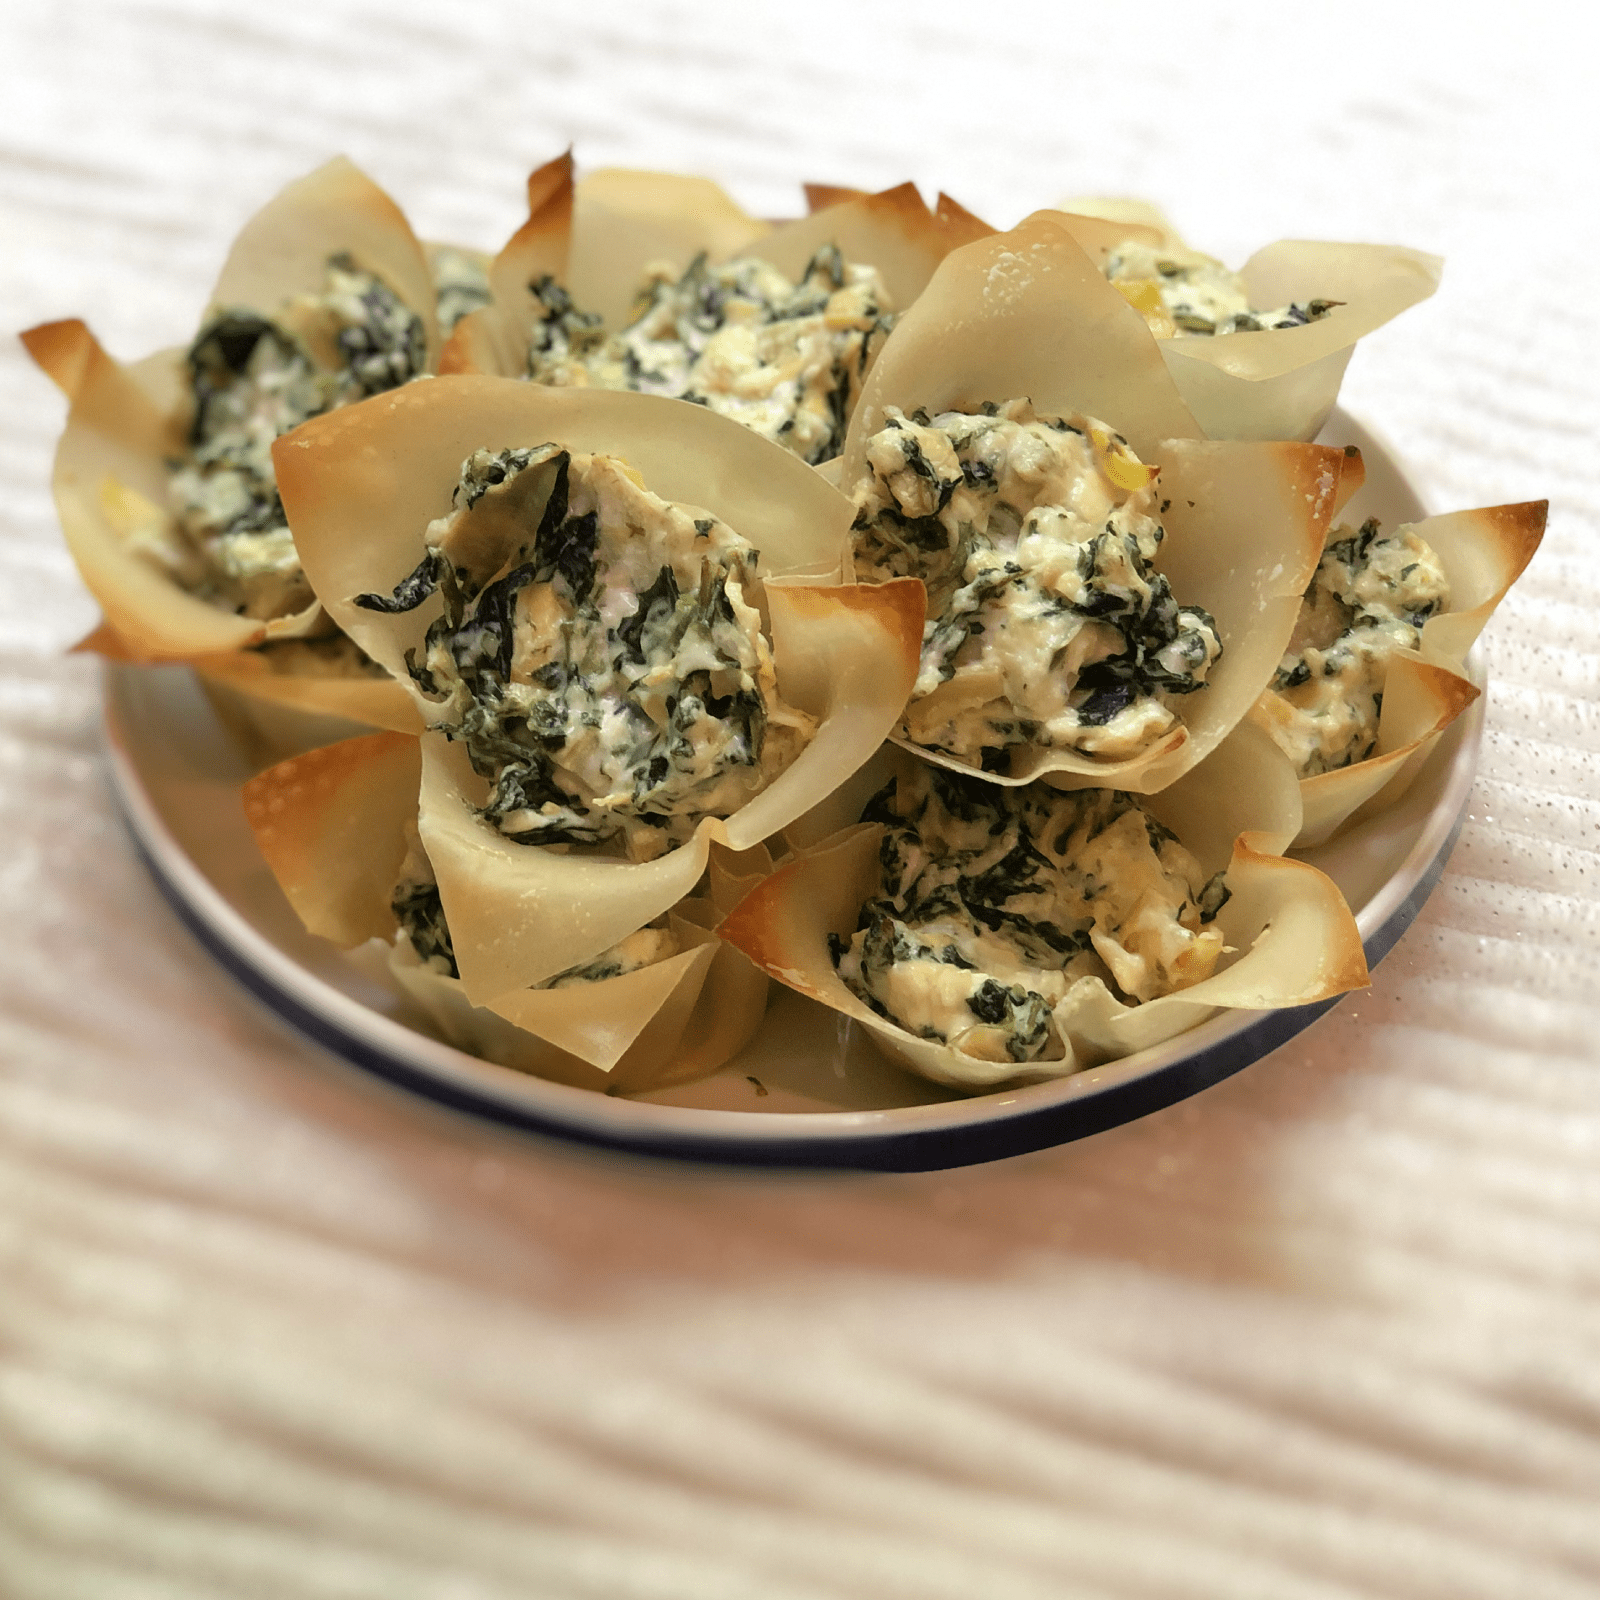 Spinach & Artichoke Dip in Wonton Wrappers